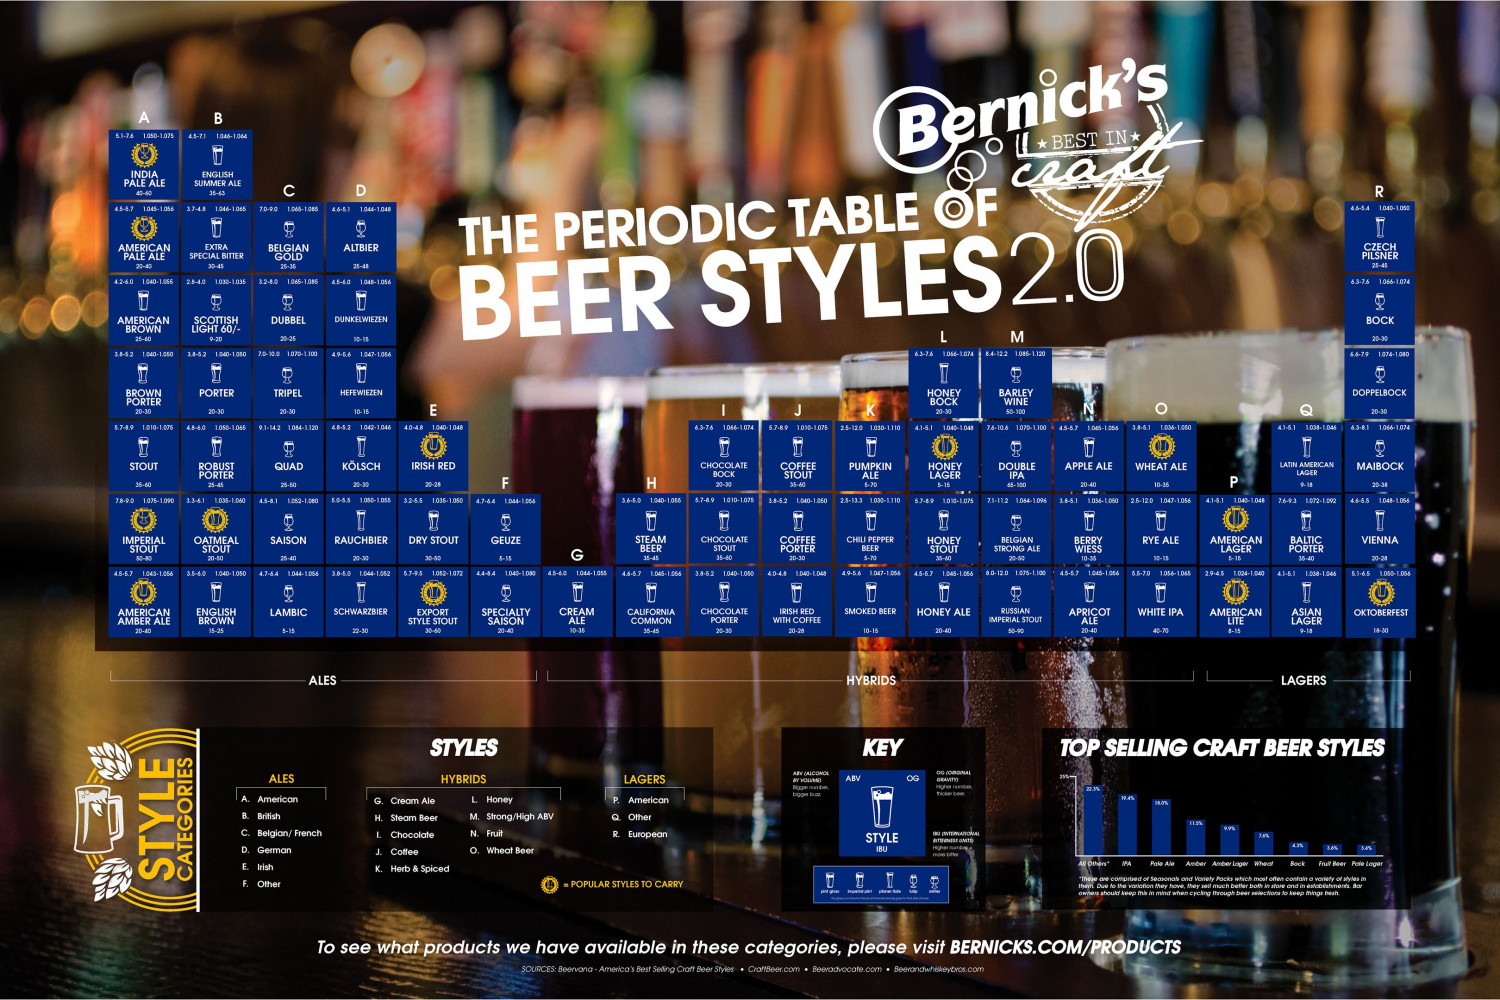 The Periodic Table of Beer Styles 2.0 Infographic